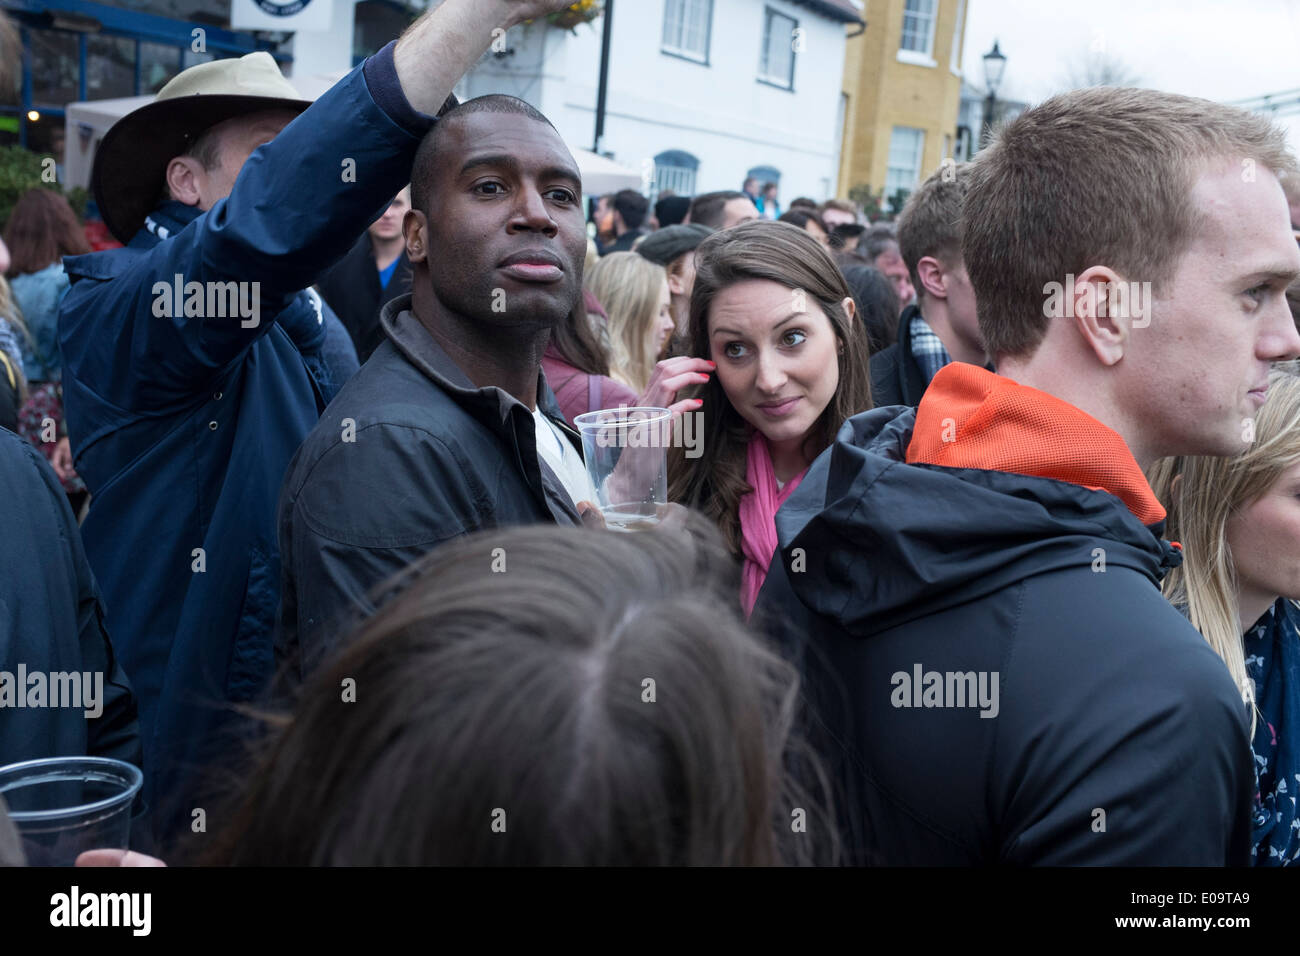 Spectators on the bank of the River Thames at Hammersmith during the annual Oxford and Cambridge Boat Race. Stock Photo